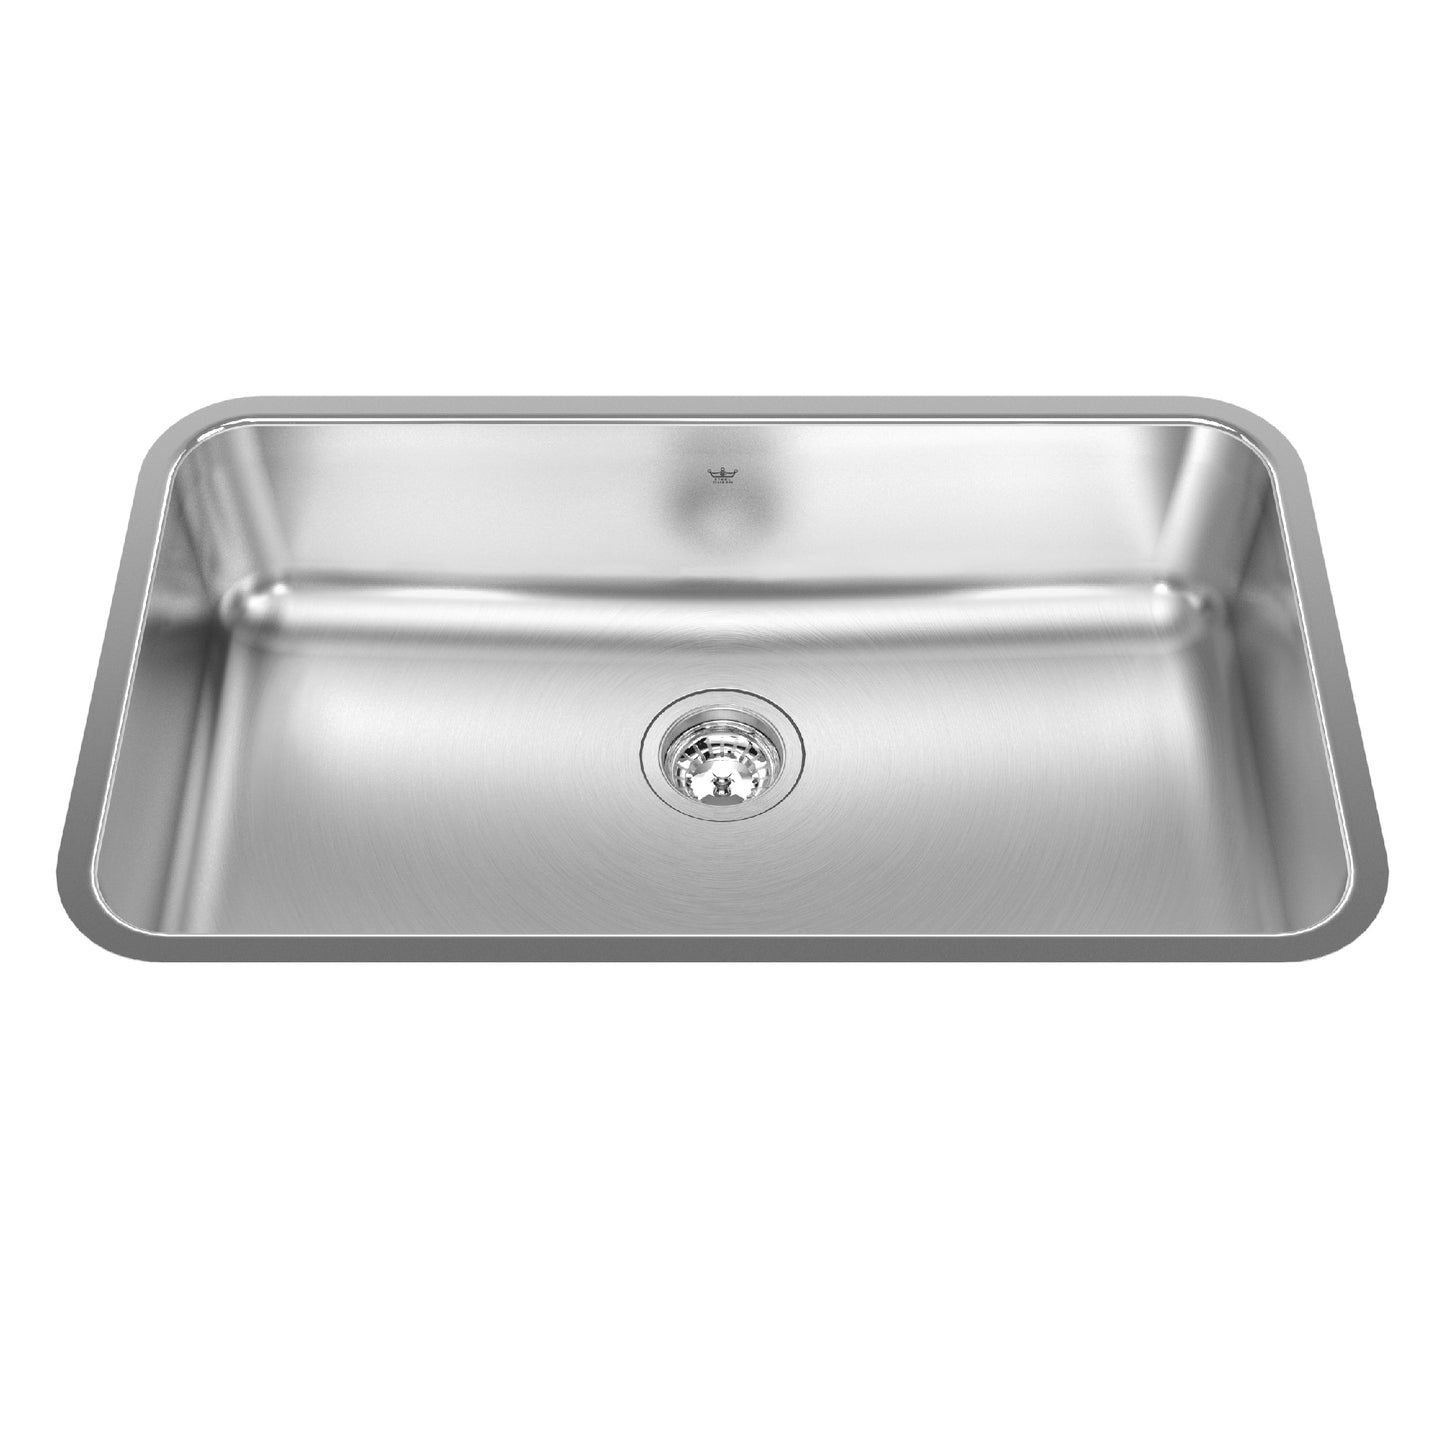 KINDRED QSUA1831-8N Steel Queen 30.75-in LR x 17.75-in FB x 8-in DP Undermount Single Bowl Stainless Steel Kitchen Sink In Satin Finished Bowl with Silk Finished Rim